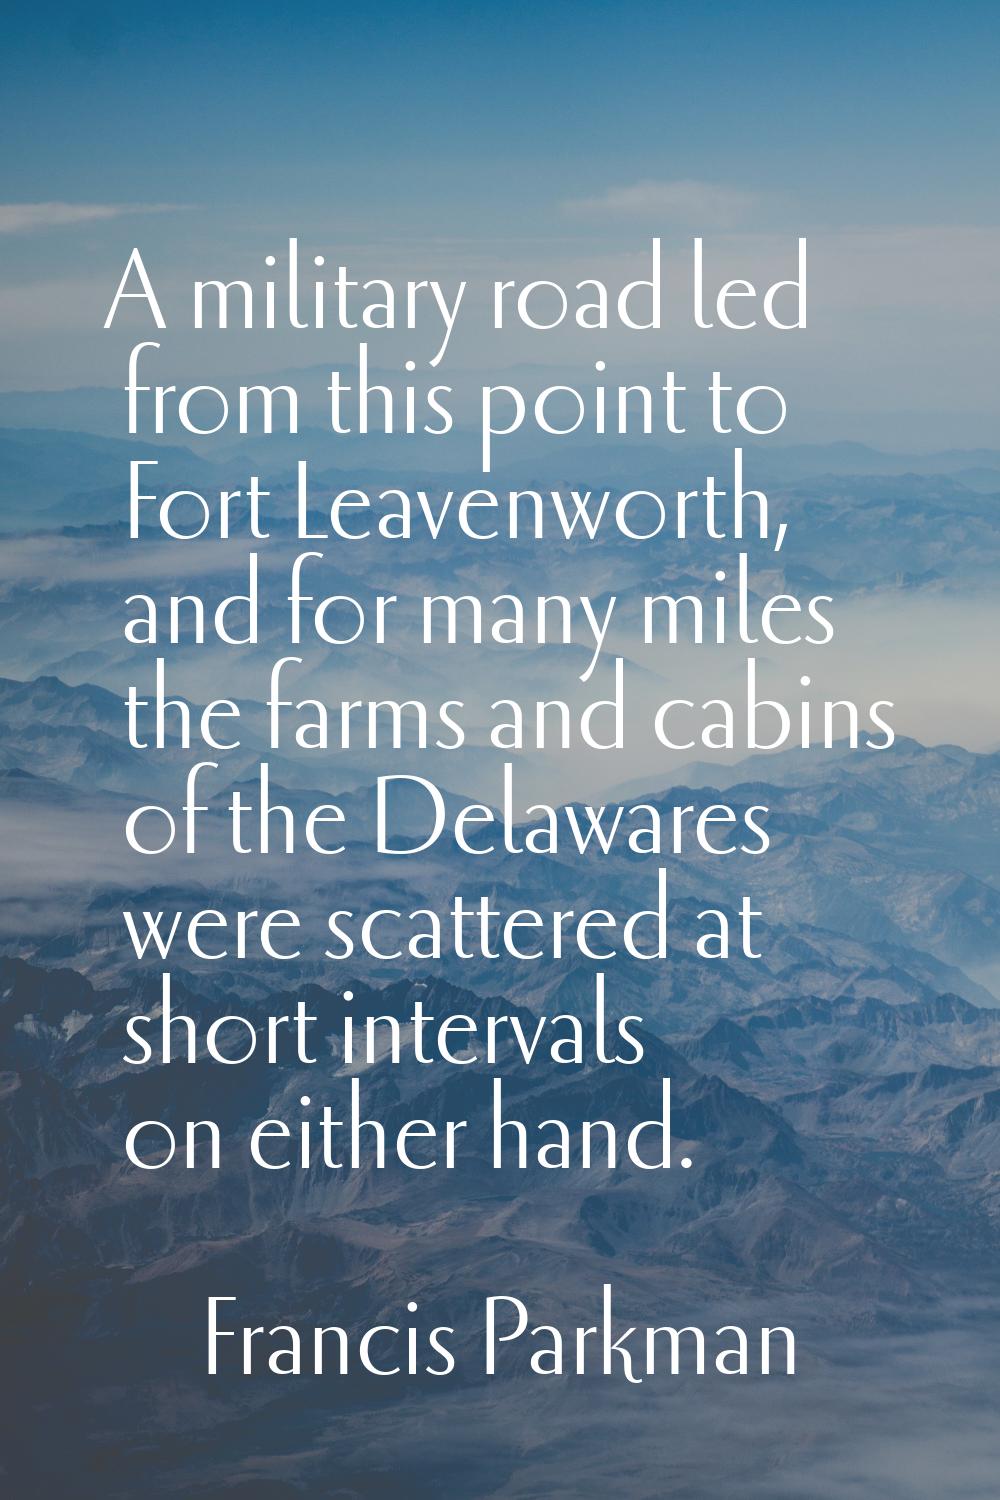 A military road led from this point to Fort Leavenworth, and for many miles the farms and cabins of